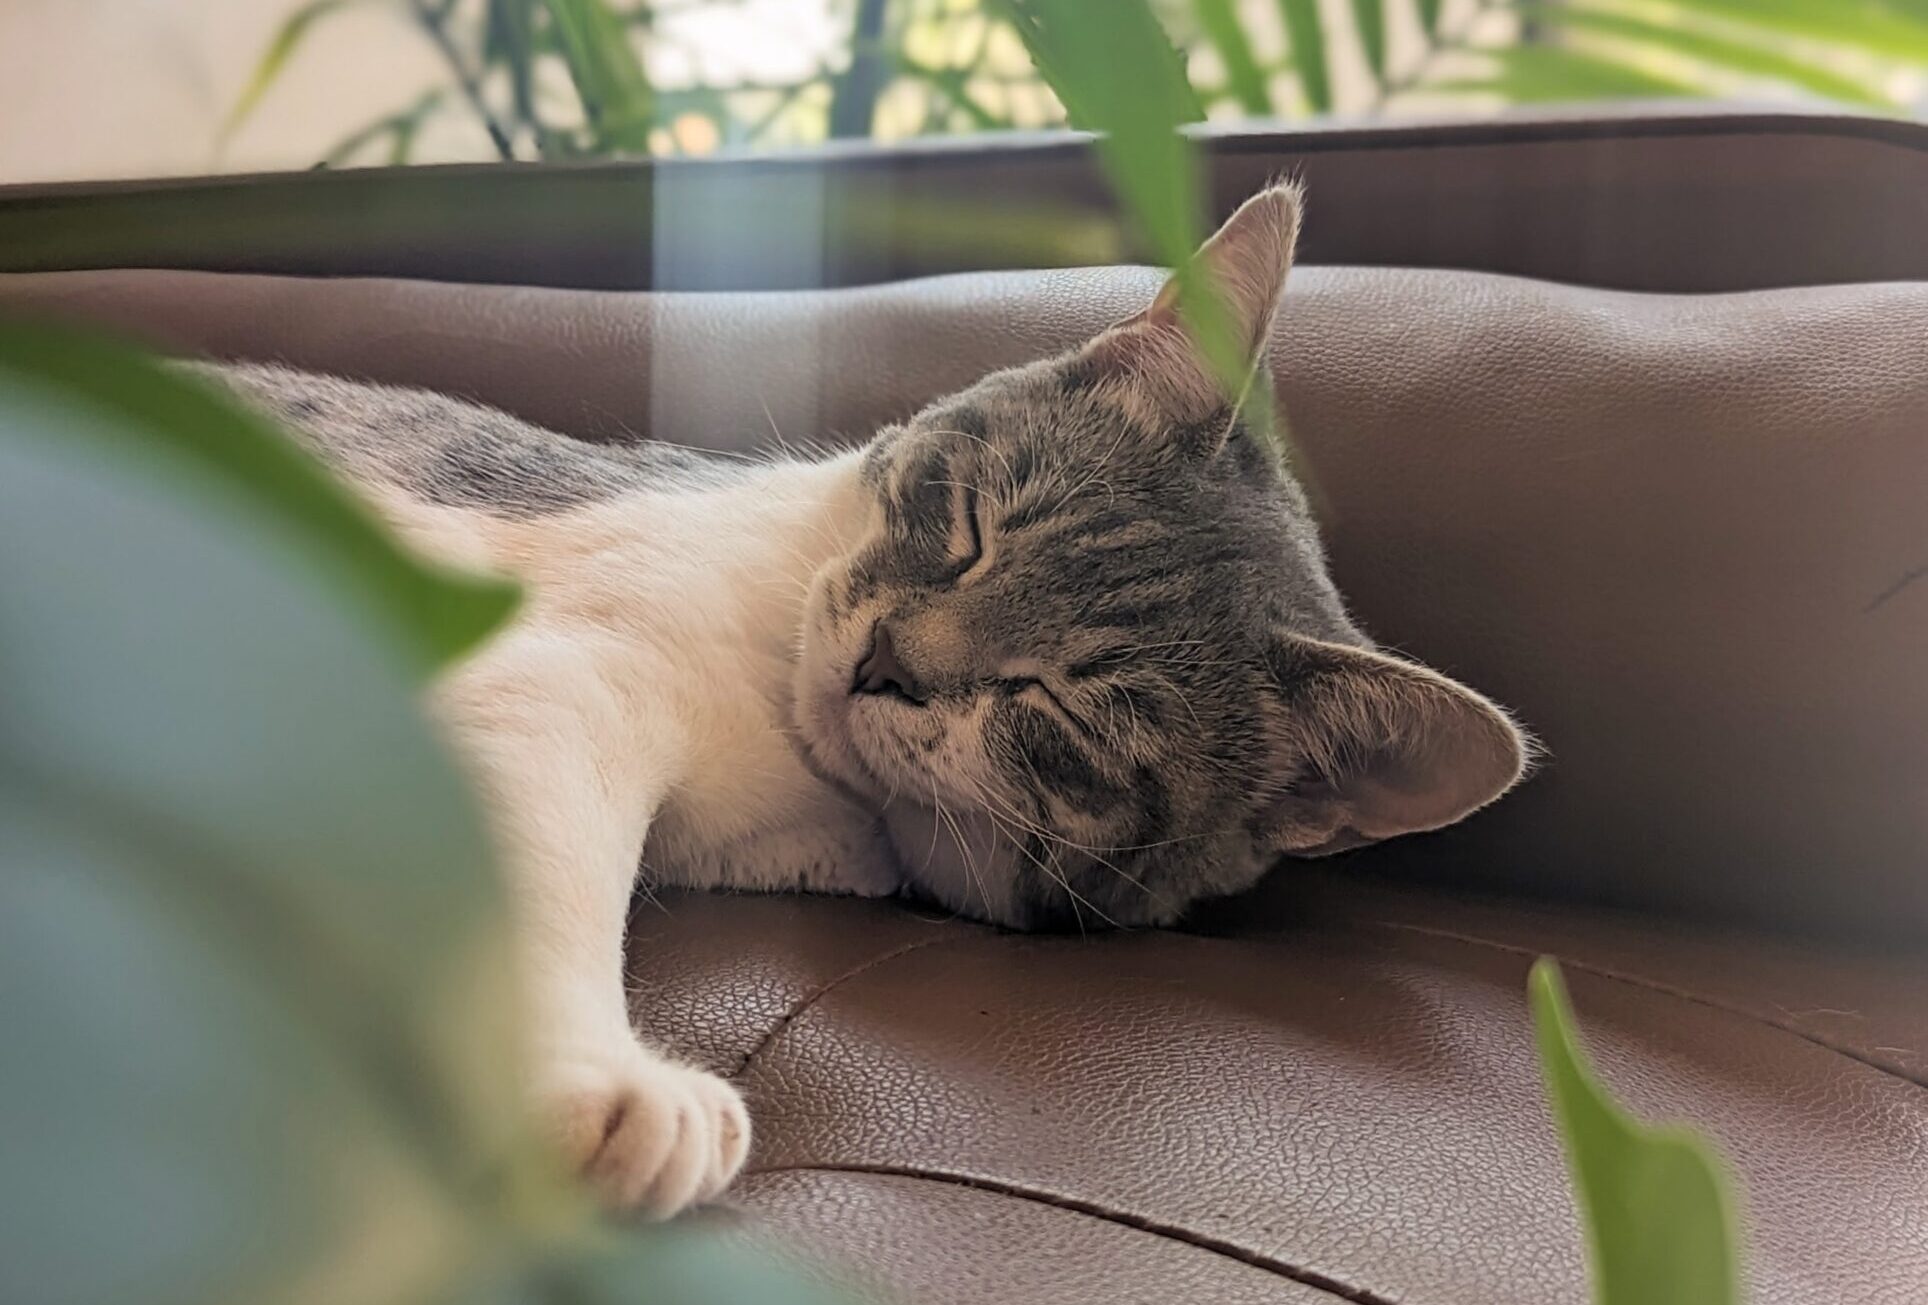 a cat sleeping on a couch